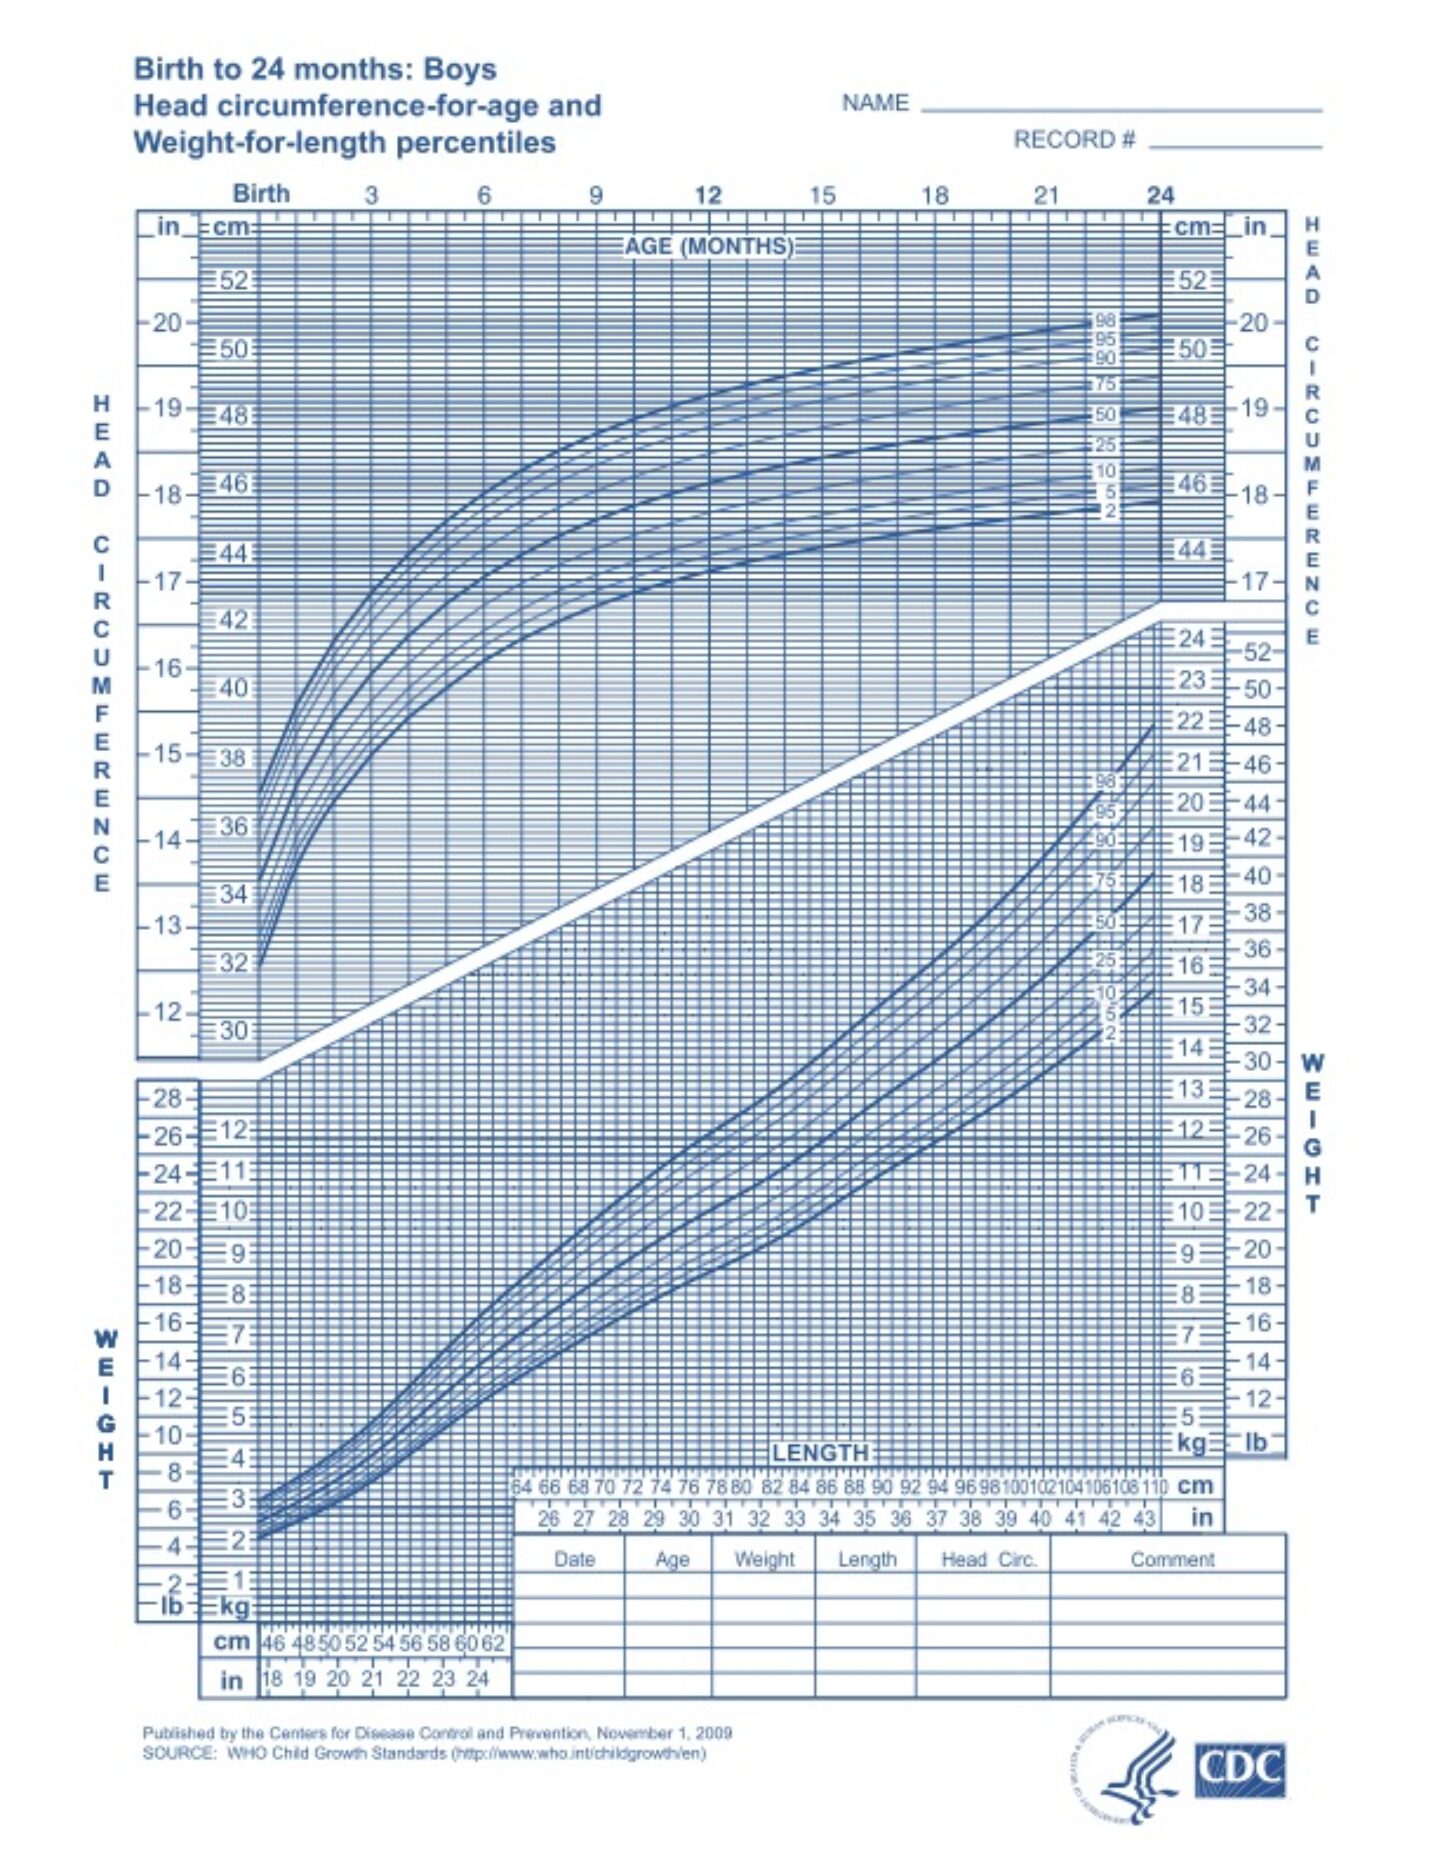 WHO Growth Charts, courtesy of CDC. Boys birth to 24 months, weight-for-length.